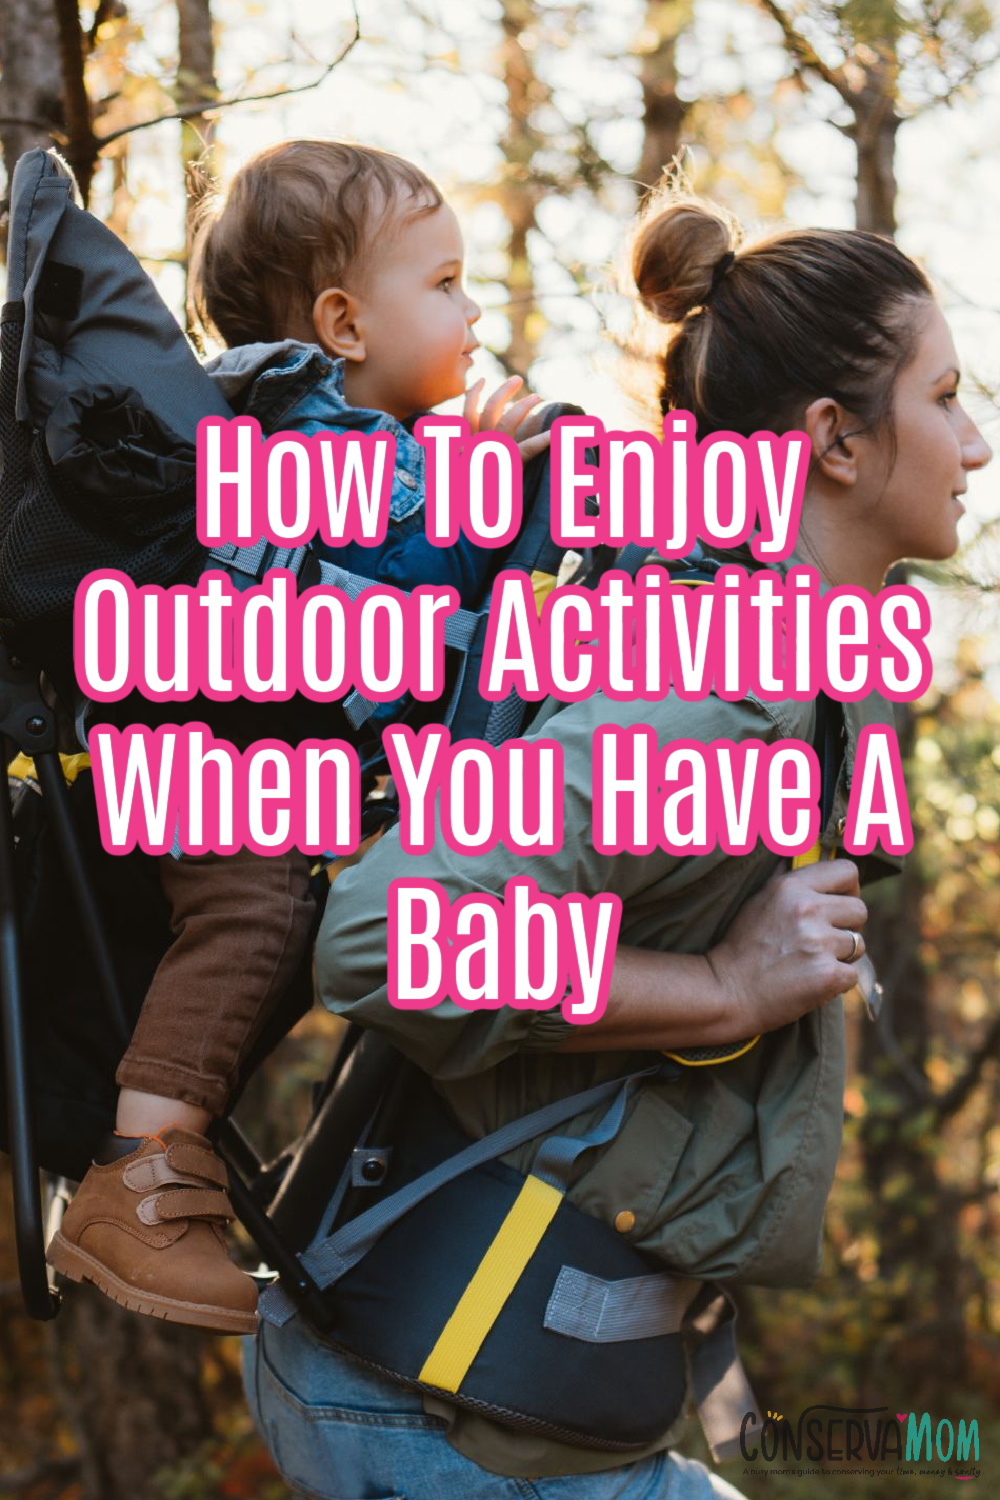 How To Enjoy Outdoor Activities When You Have A Baby